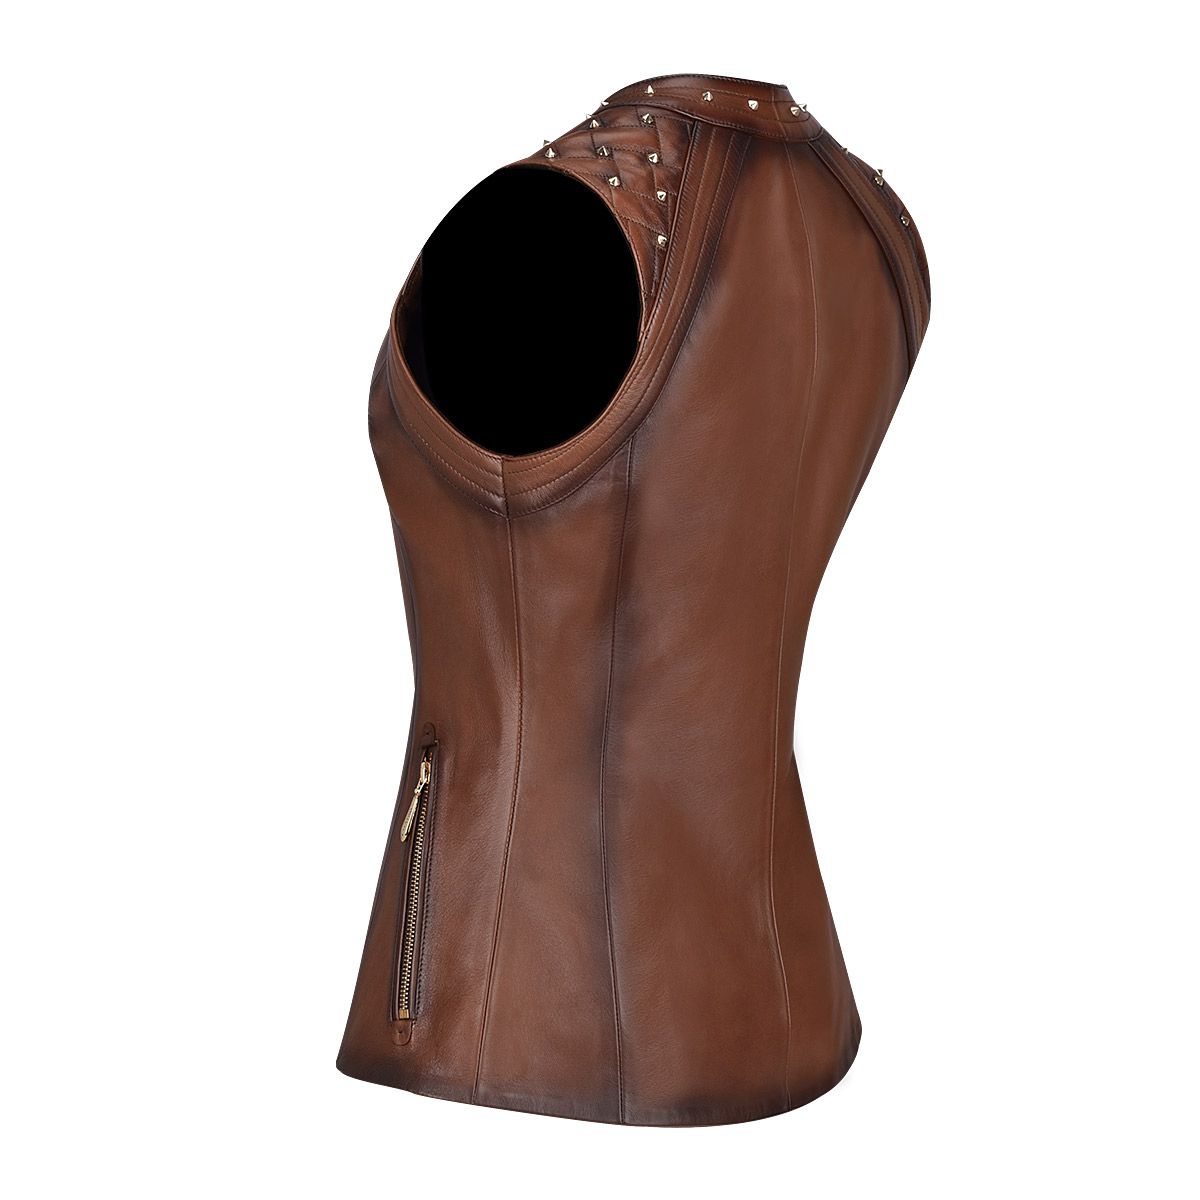 M289COC - Cuadra brown casual fashion leather vest for women-Kuet.us